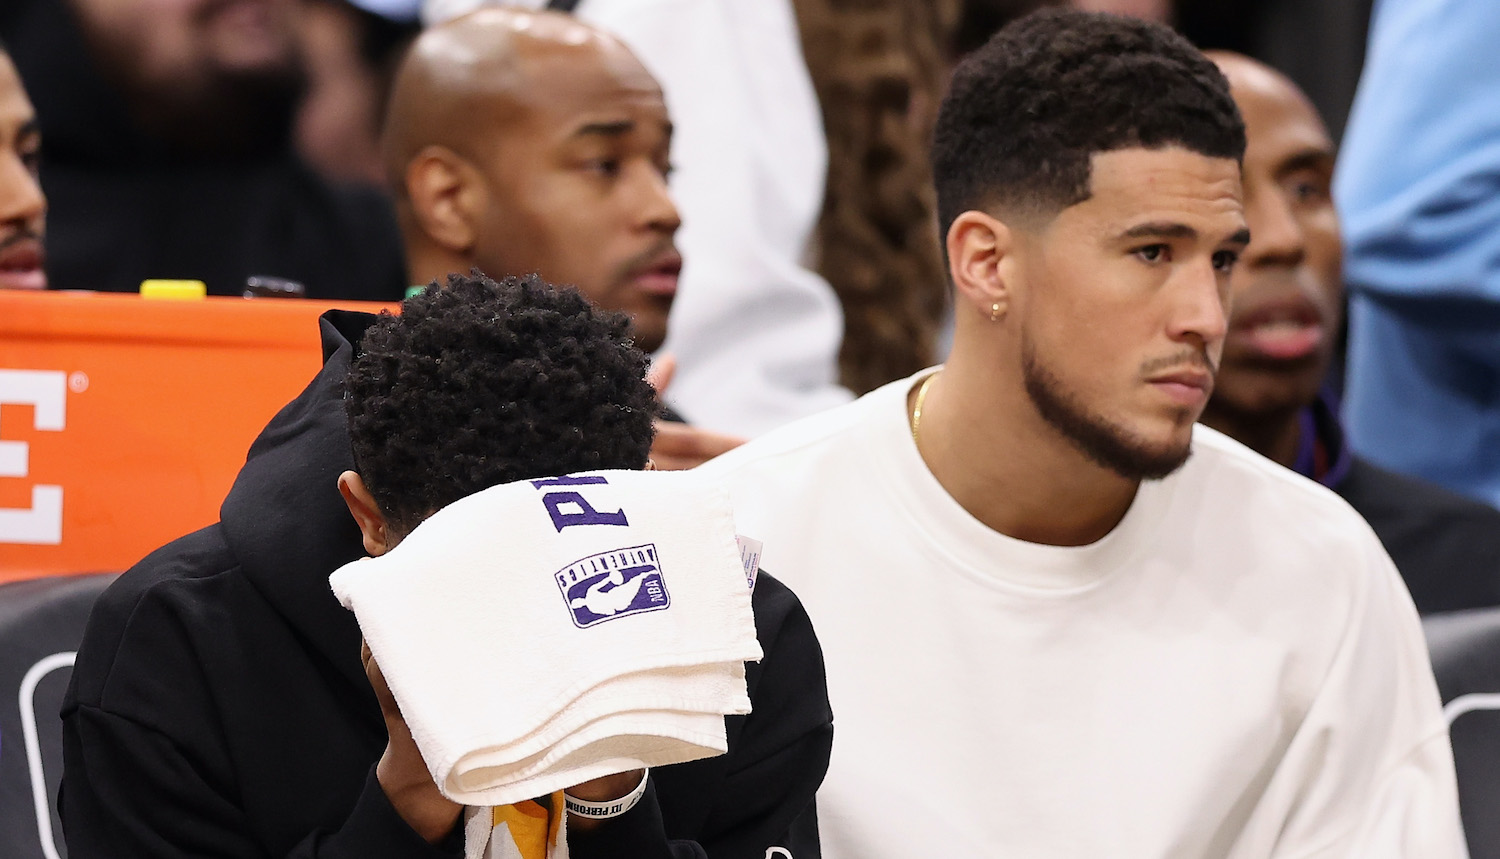 PHOENIX, ARIZONA - JANUARY 06: Cameron Payne #15 and Devin Booker #1 of the Phoenix Suns react on the bench during the final moments of the NBA game against the Miami Heat at Footprint Center on January 06, 2023 in Phoenix, Arizona. The Heat defeated the Suns 104-96. NOTE TO USER: User expressly acknowledges and agrees that, by downloading and or using this photograph, User is consenting to the terms and conditions of the Getty Images License Agreement. (Photo by Christian Petersen/Getty Images)